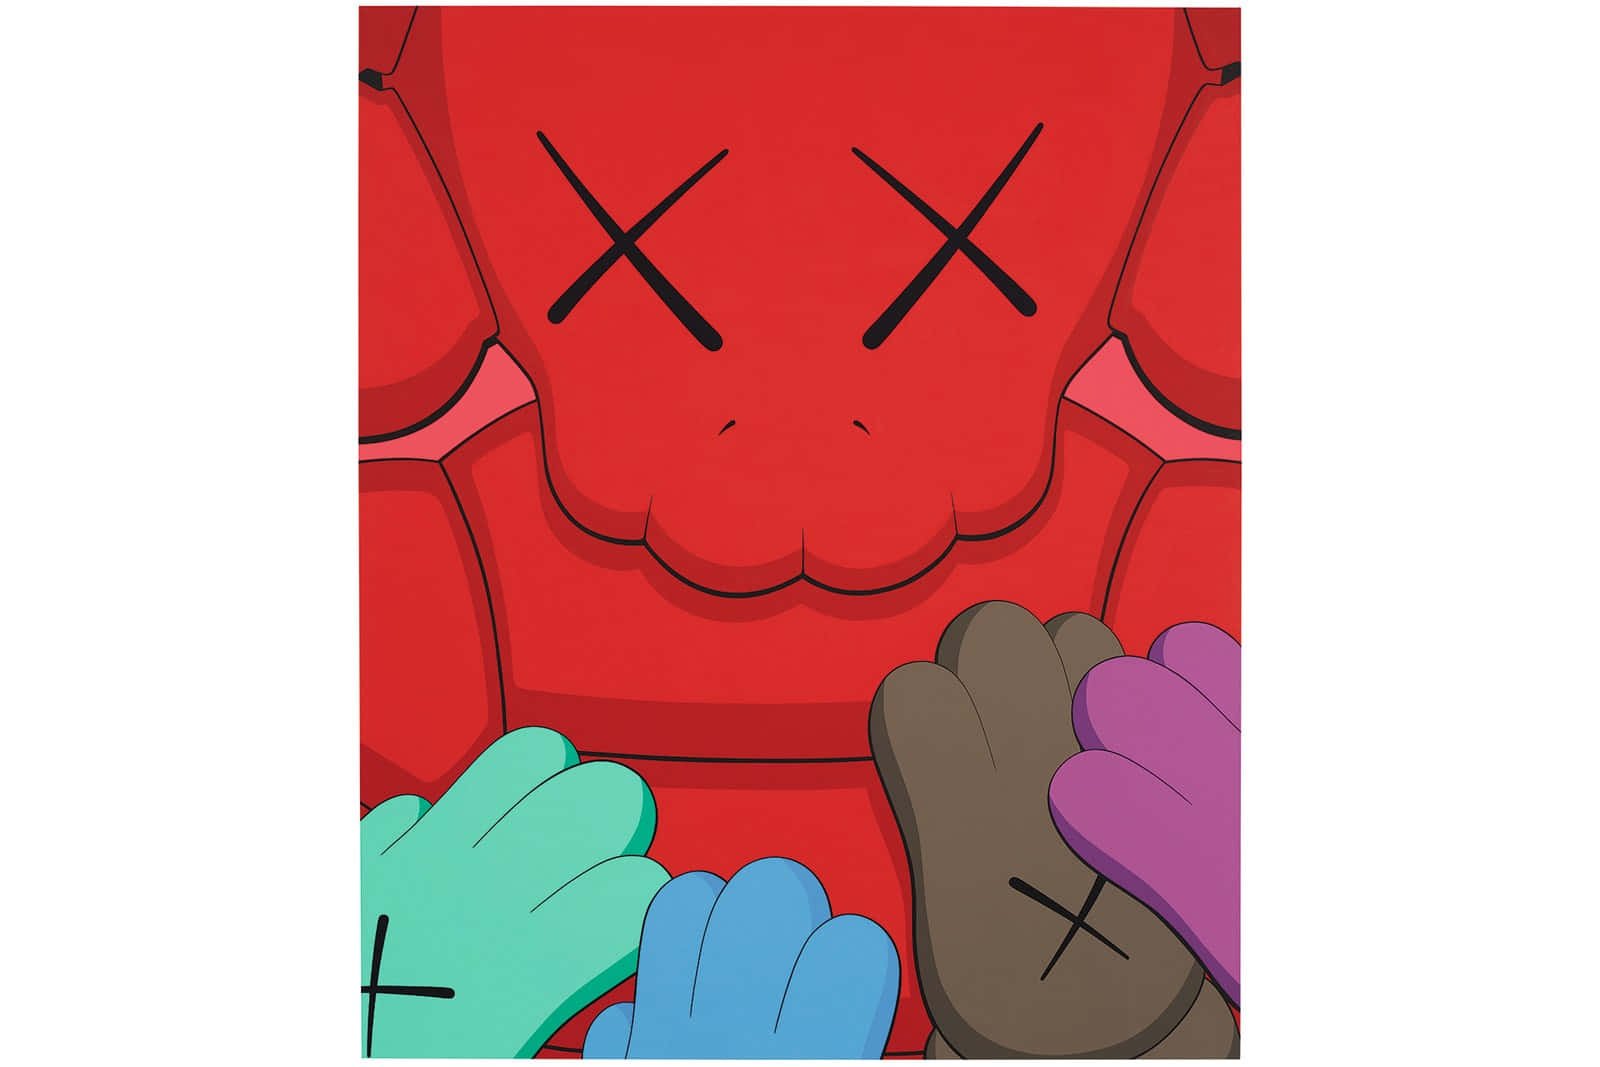 KAWS unveils a colorful collaboration with Uniqlo